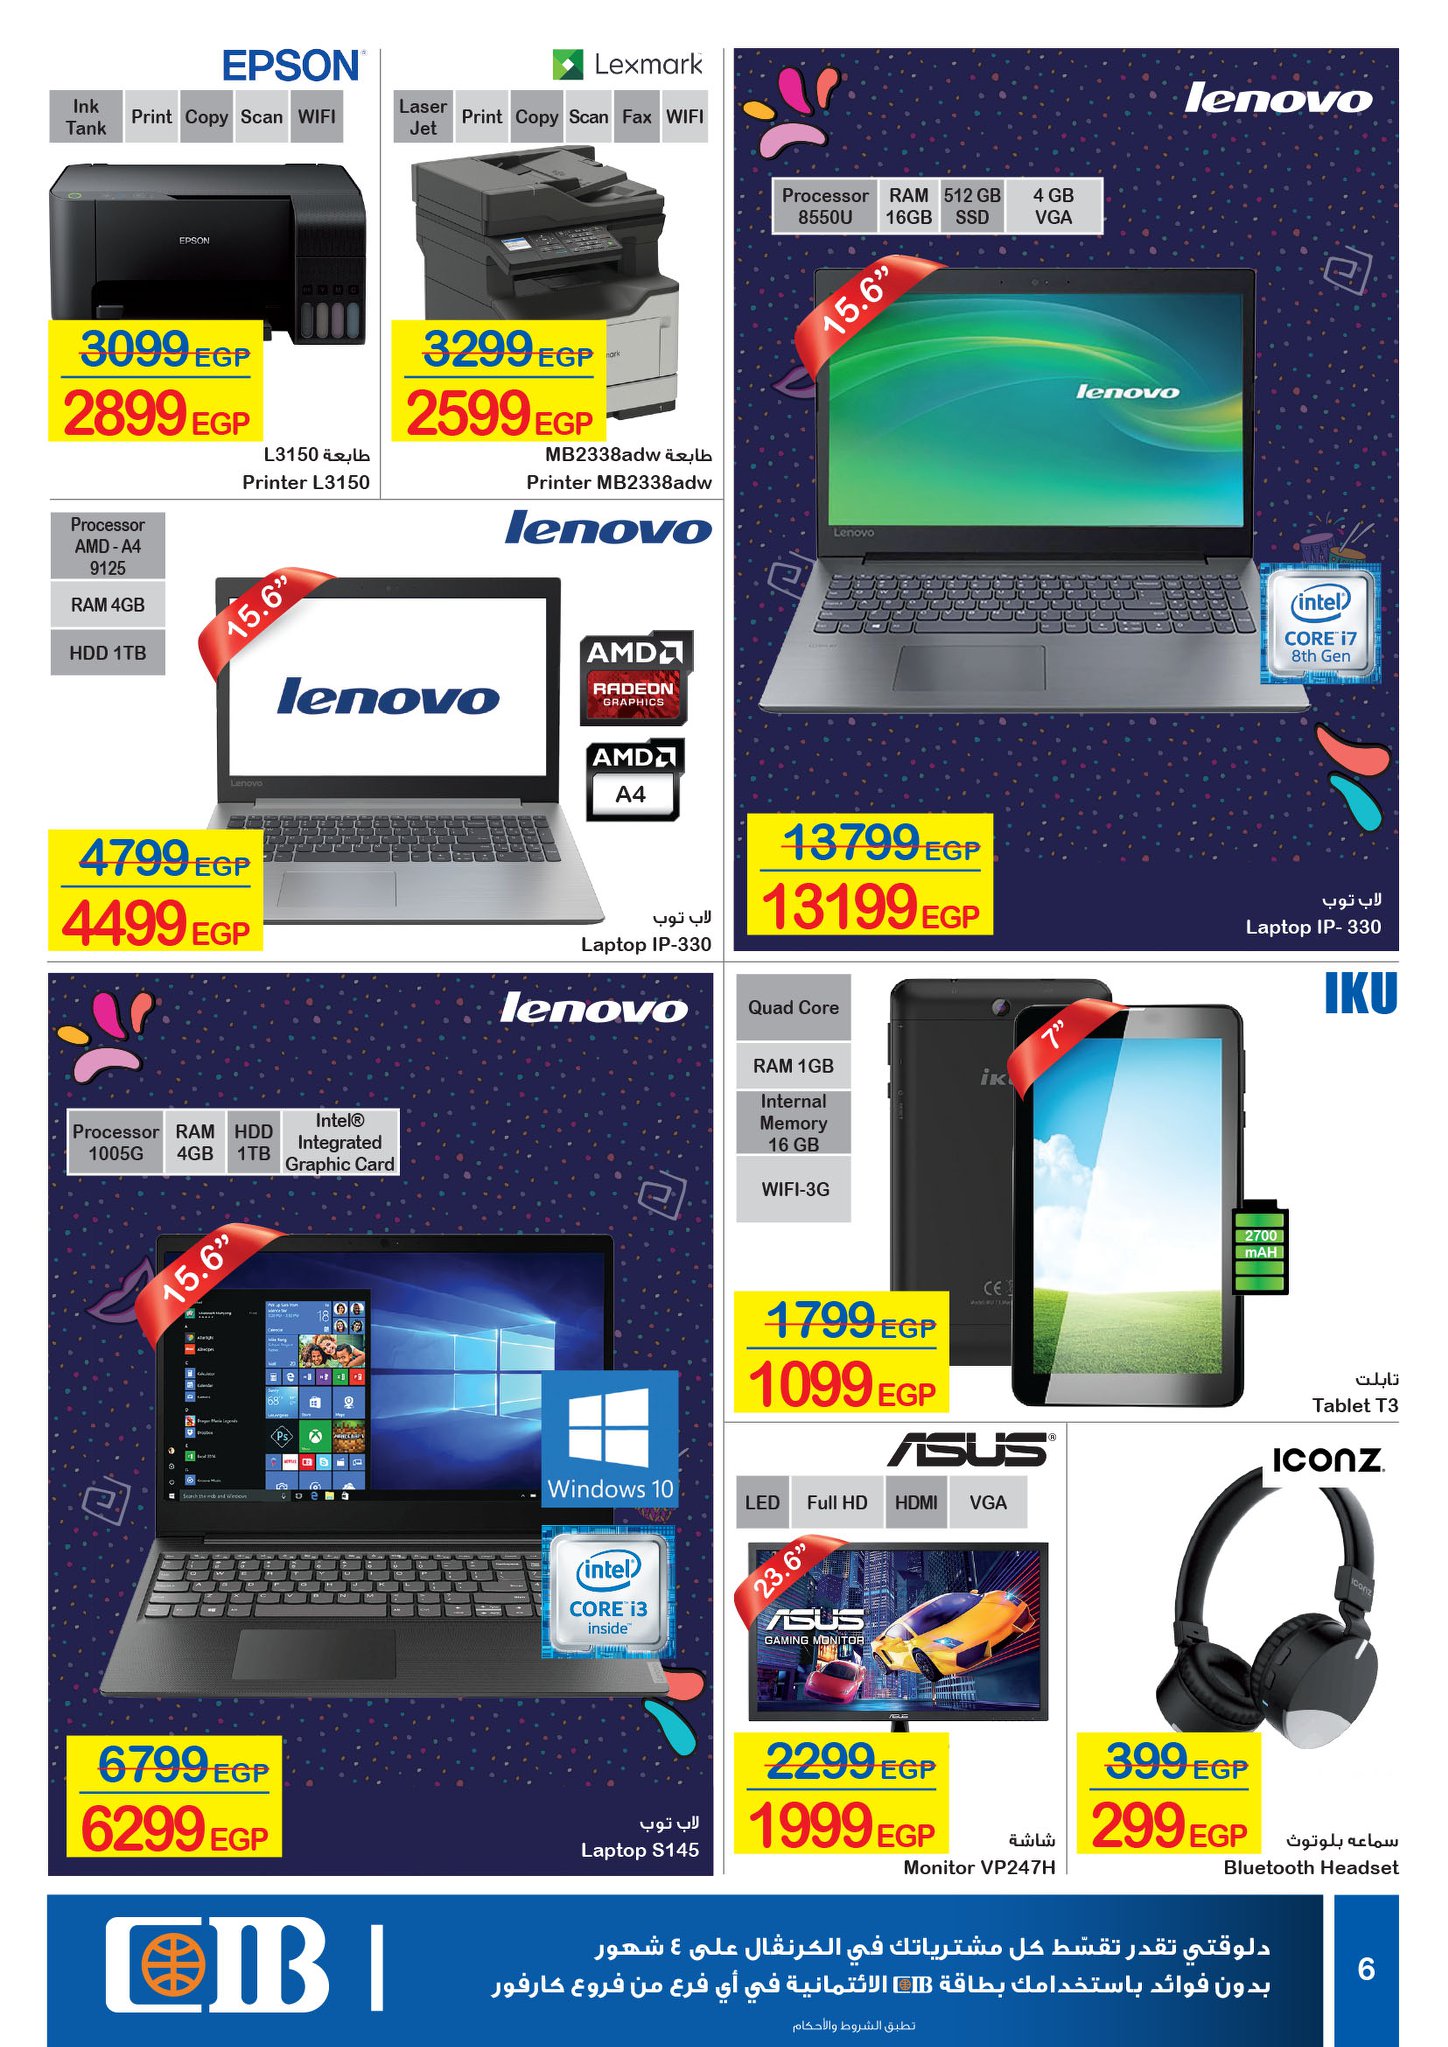 Carrefour Flyer from 16/7 till 27/7 | Carrefour Egypt 6